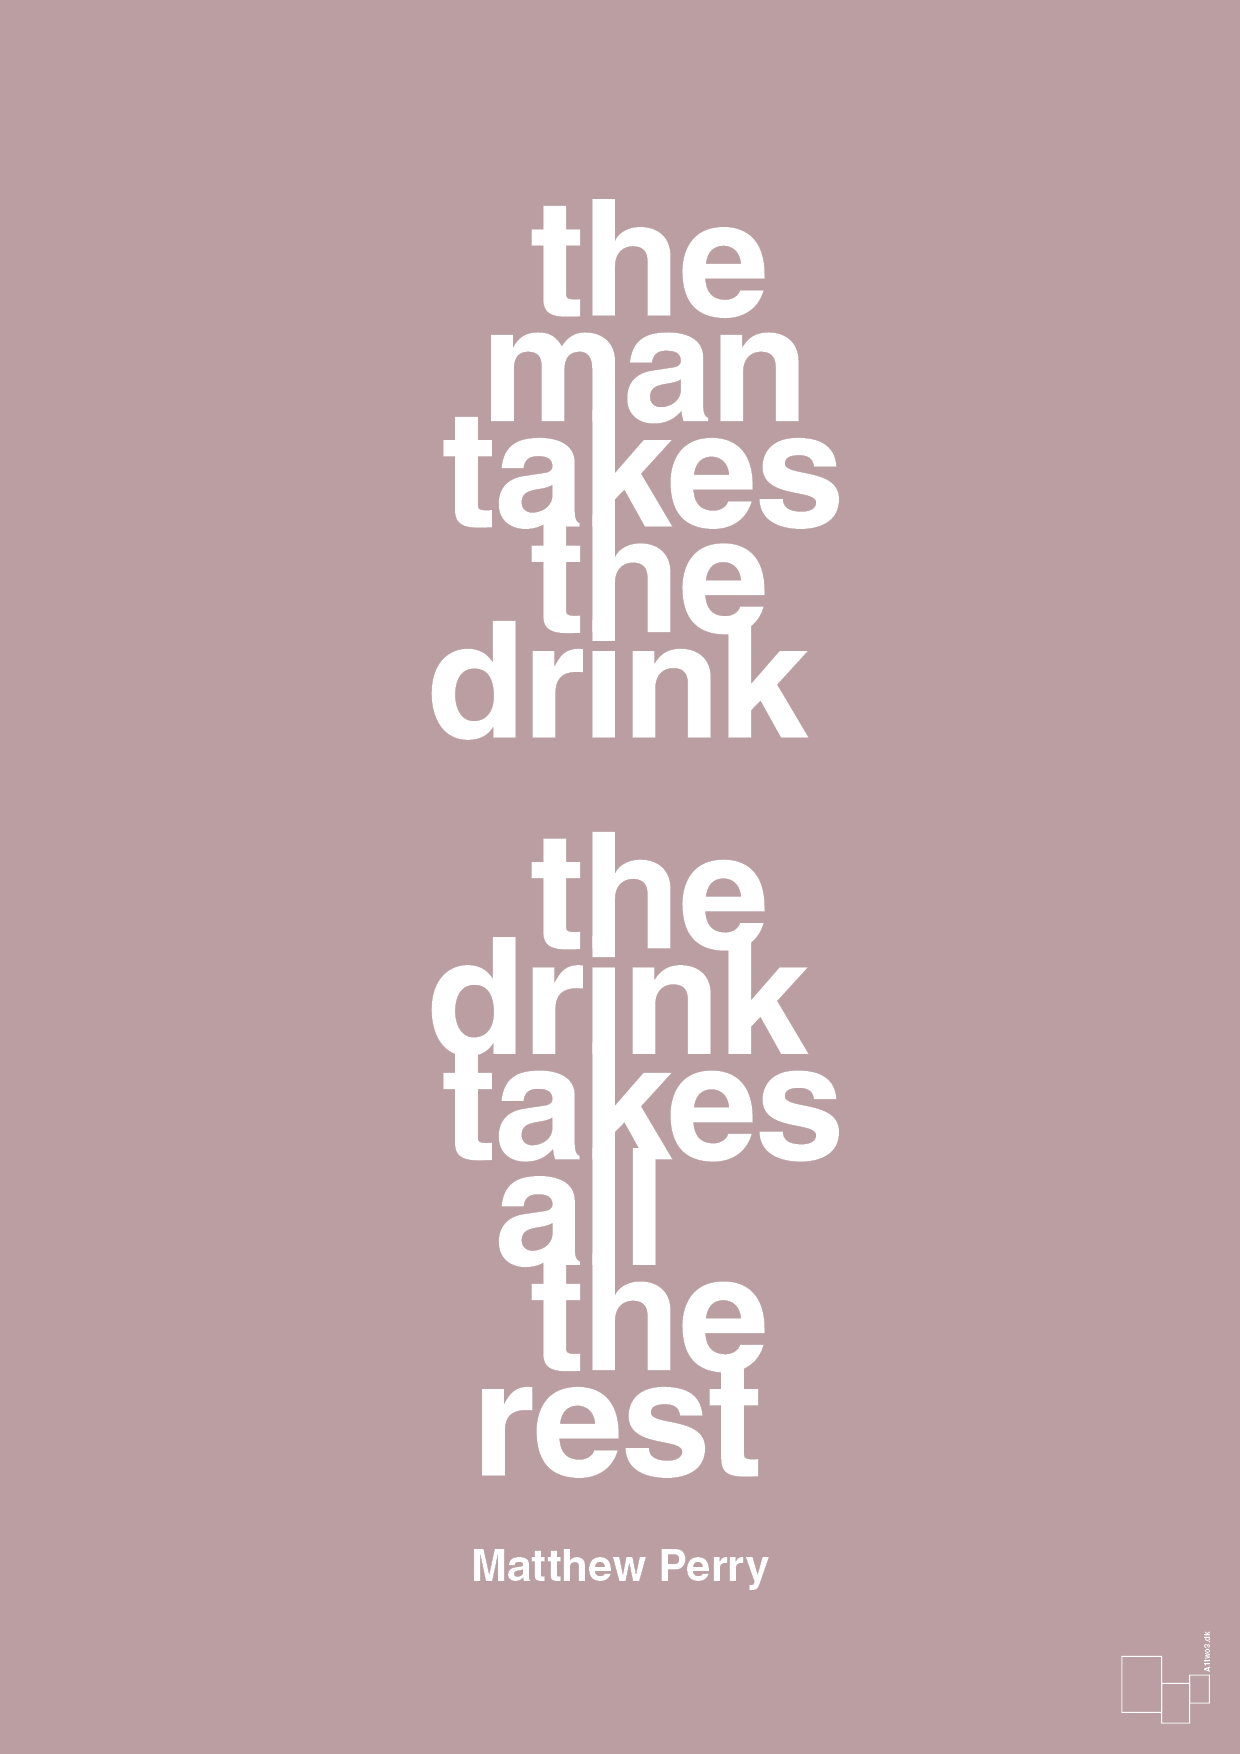 the man takes the drink the drink takes all the rest - Plakat med Citater i Light Rose